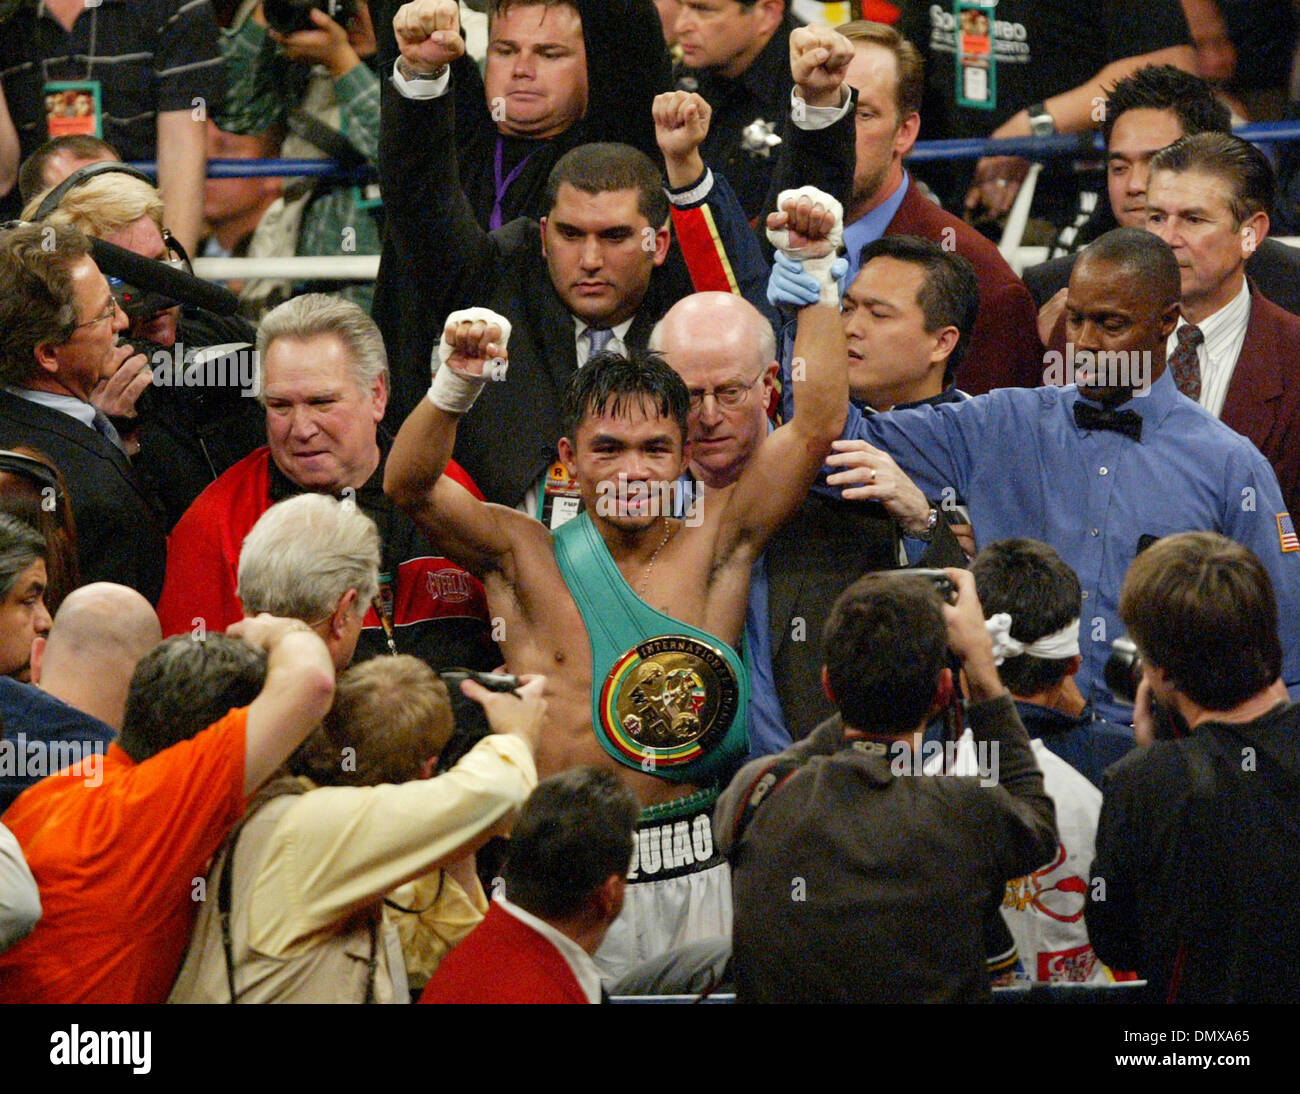 Jan 21, 2006; Las Vegas, NV, USA; MANNY PACQUIAO of the Philippines, celebrates after stopping Erik Morales in the 10th round to win the super featherweight boxing match Saturday night. Mandatory Credit: Photo by J.P. Yim/ZUMA Press. (©) Copyright 2006 by J. P. Yim Stock Photo